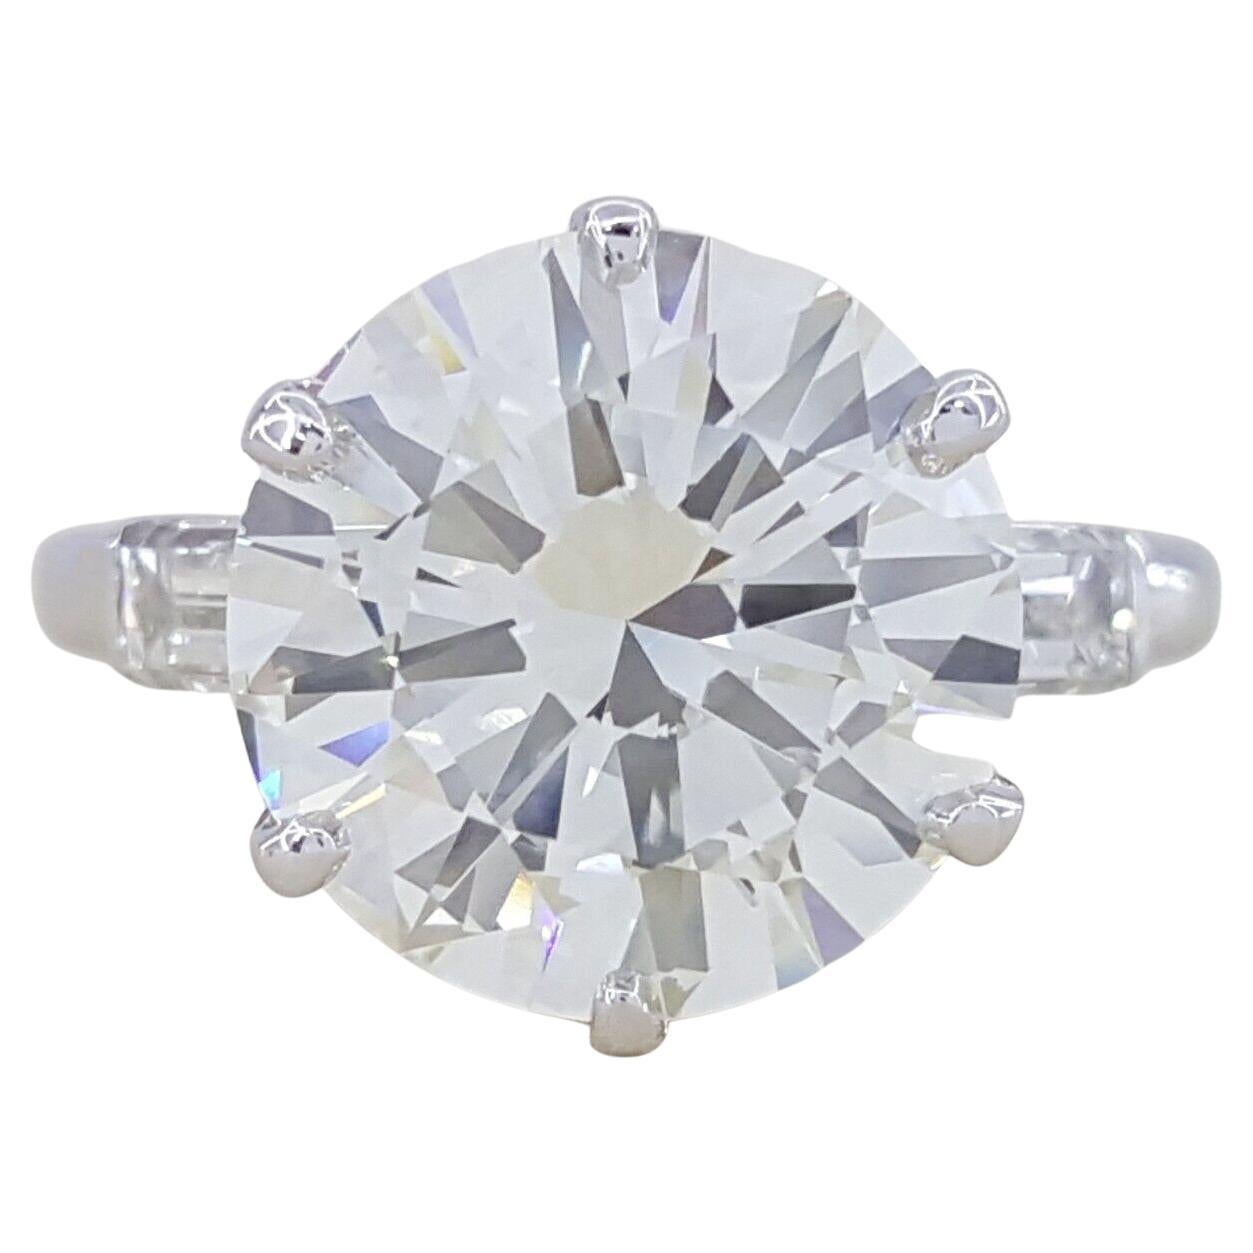 Three 3-Stone Round Brilliant Cut Diamond Engagement Ring. 

The ring weighs 4.9 grams, size 4.75, the center stone is a Natural Round Brilliant Cut diamond 

